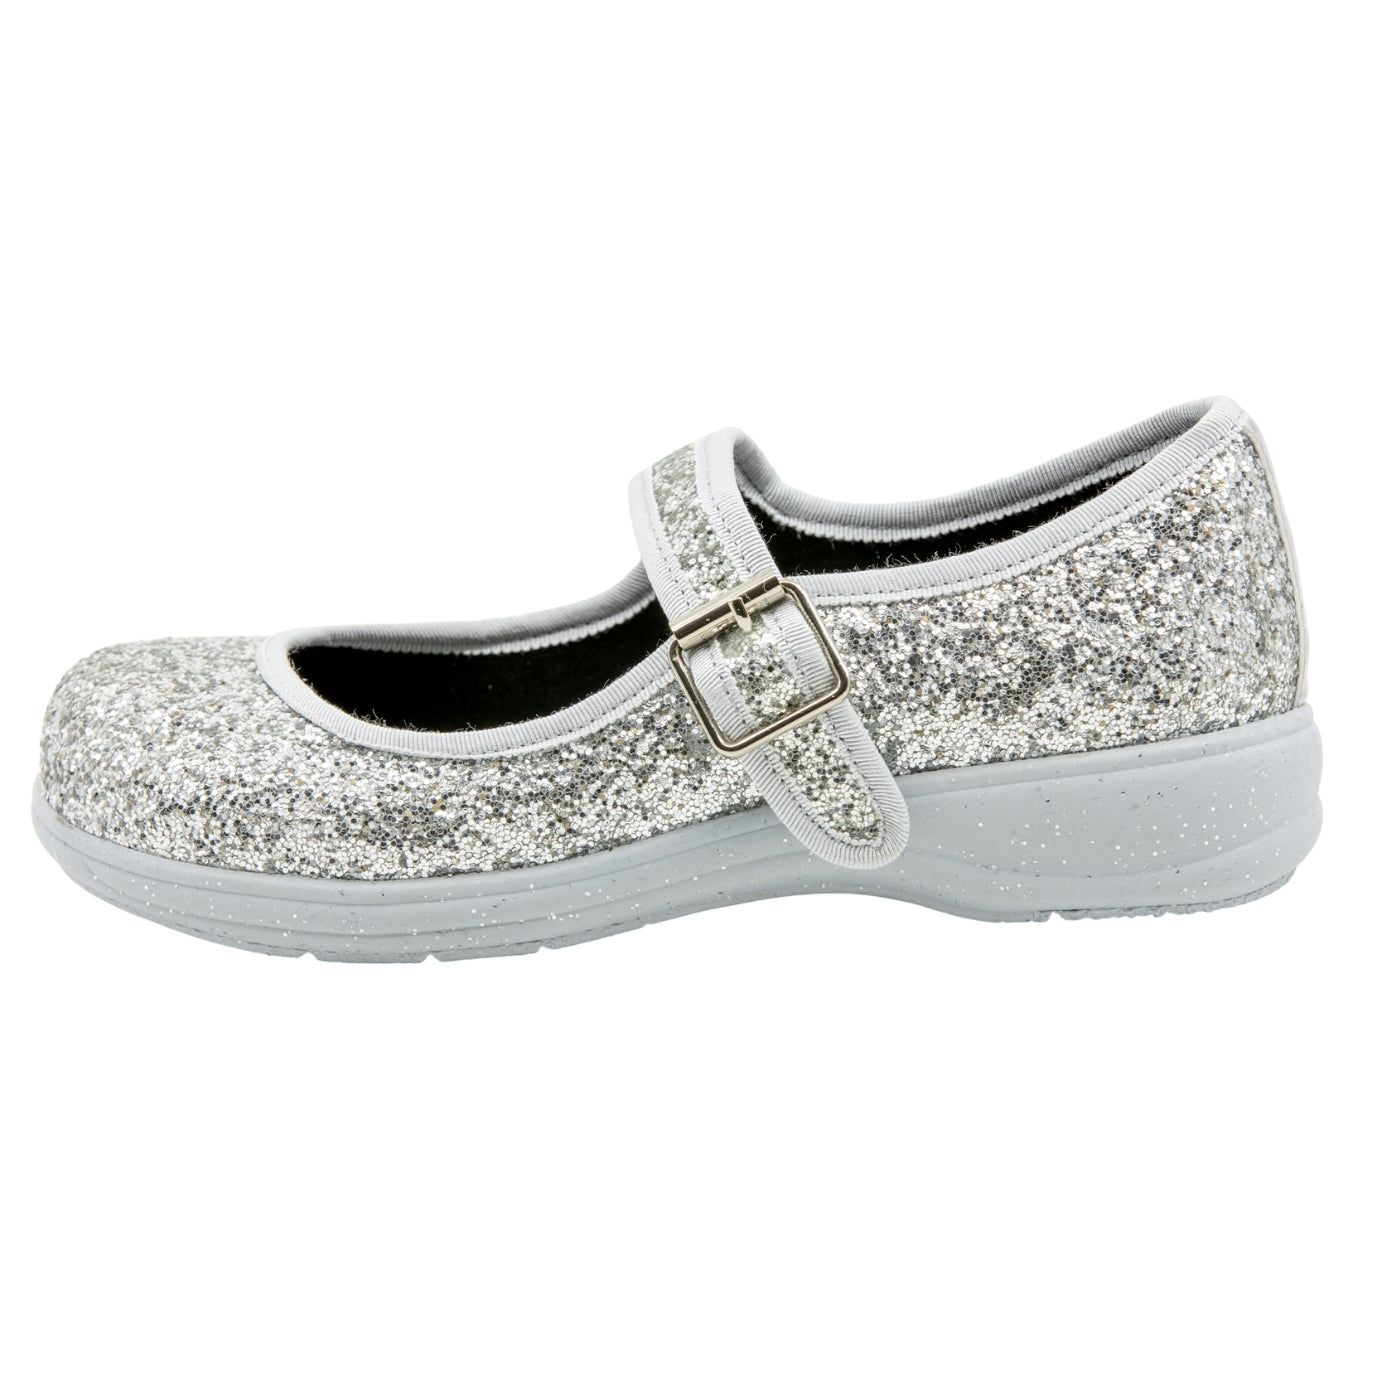 Disco Mary Janes by RainbowsAndFairies.com.au (Silver Glitter - Disco Ball - Sparkle Shoes - Buckle Shoes - Mismatched Shoes - Cute & Comfy) - SKU: FW_MARYJ_DISCO_ORG - Pic-03